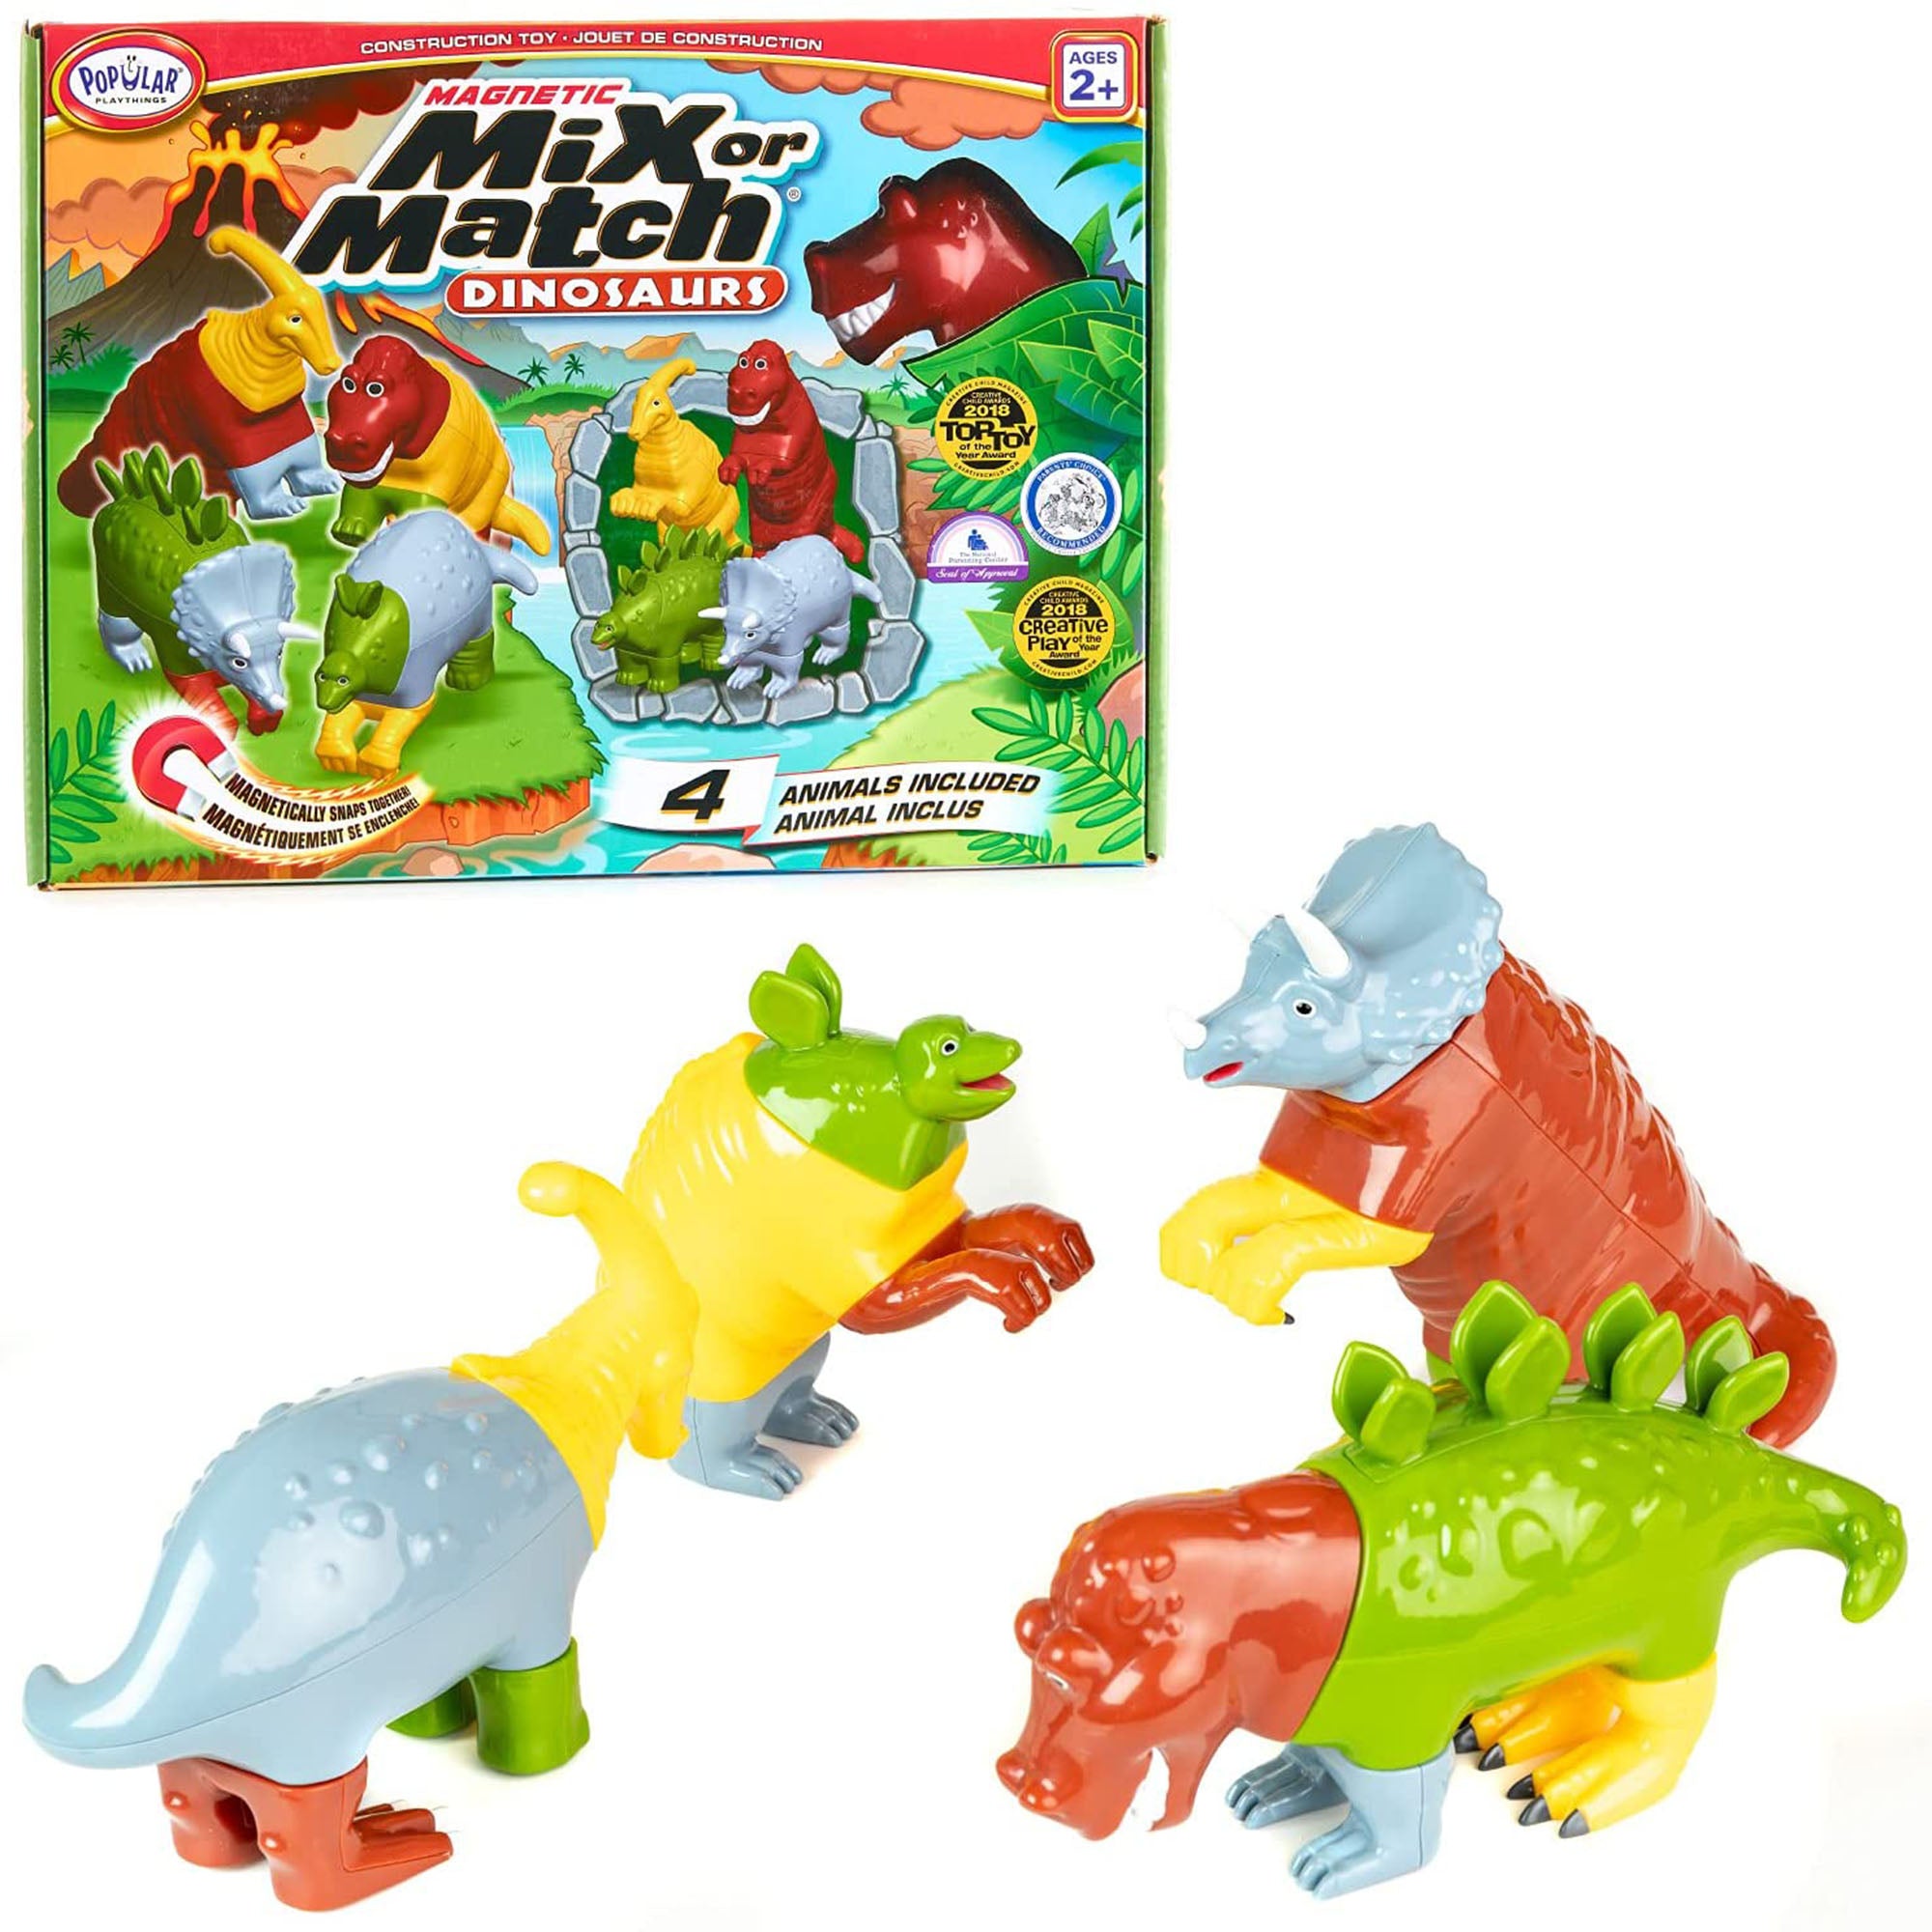 MAGNETIC MIX OR MATCH DINOSAURS